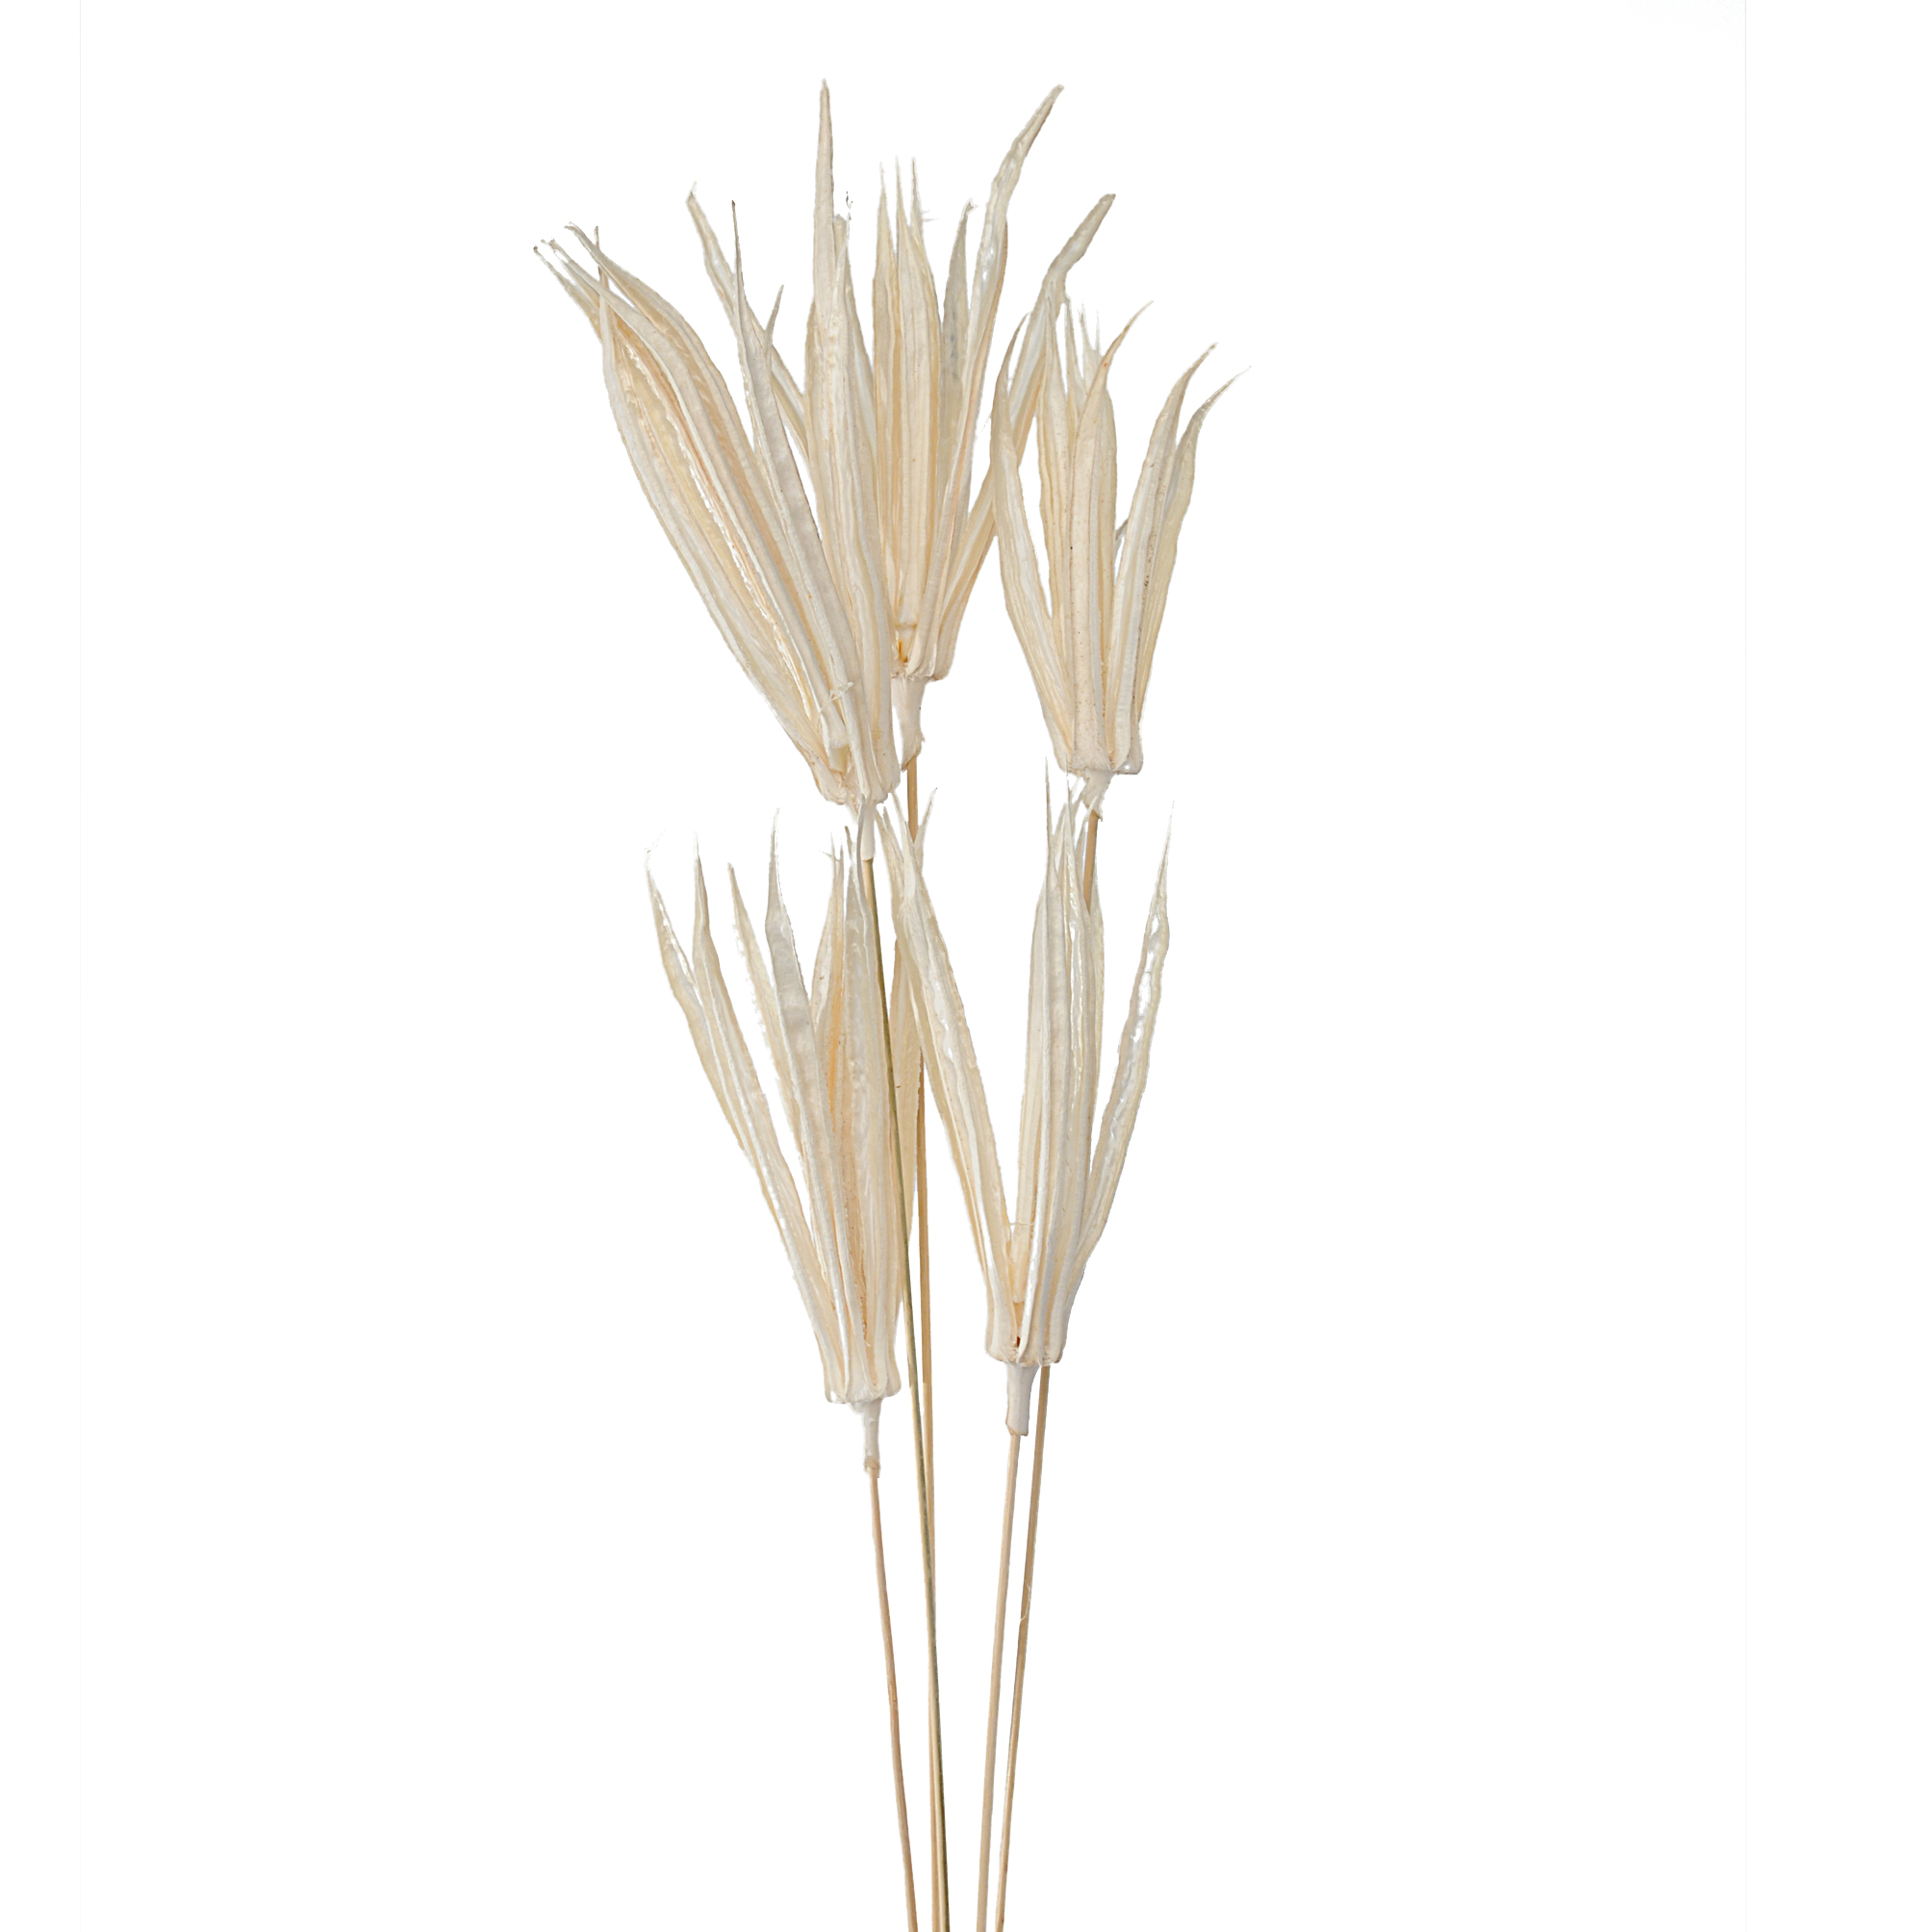 NATURAL PRODUCTS DRIED FLOWERS AND ERBS,OKURA GAMBATA 5 PZ. SBIAN. 75 CM